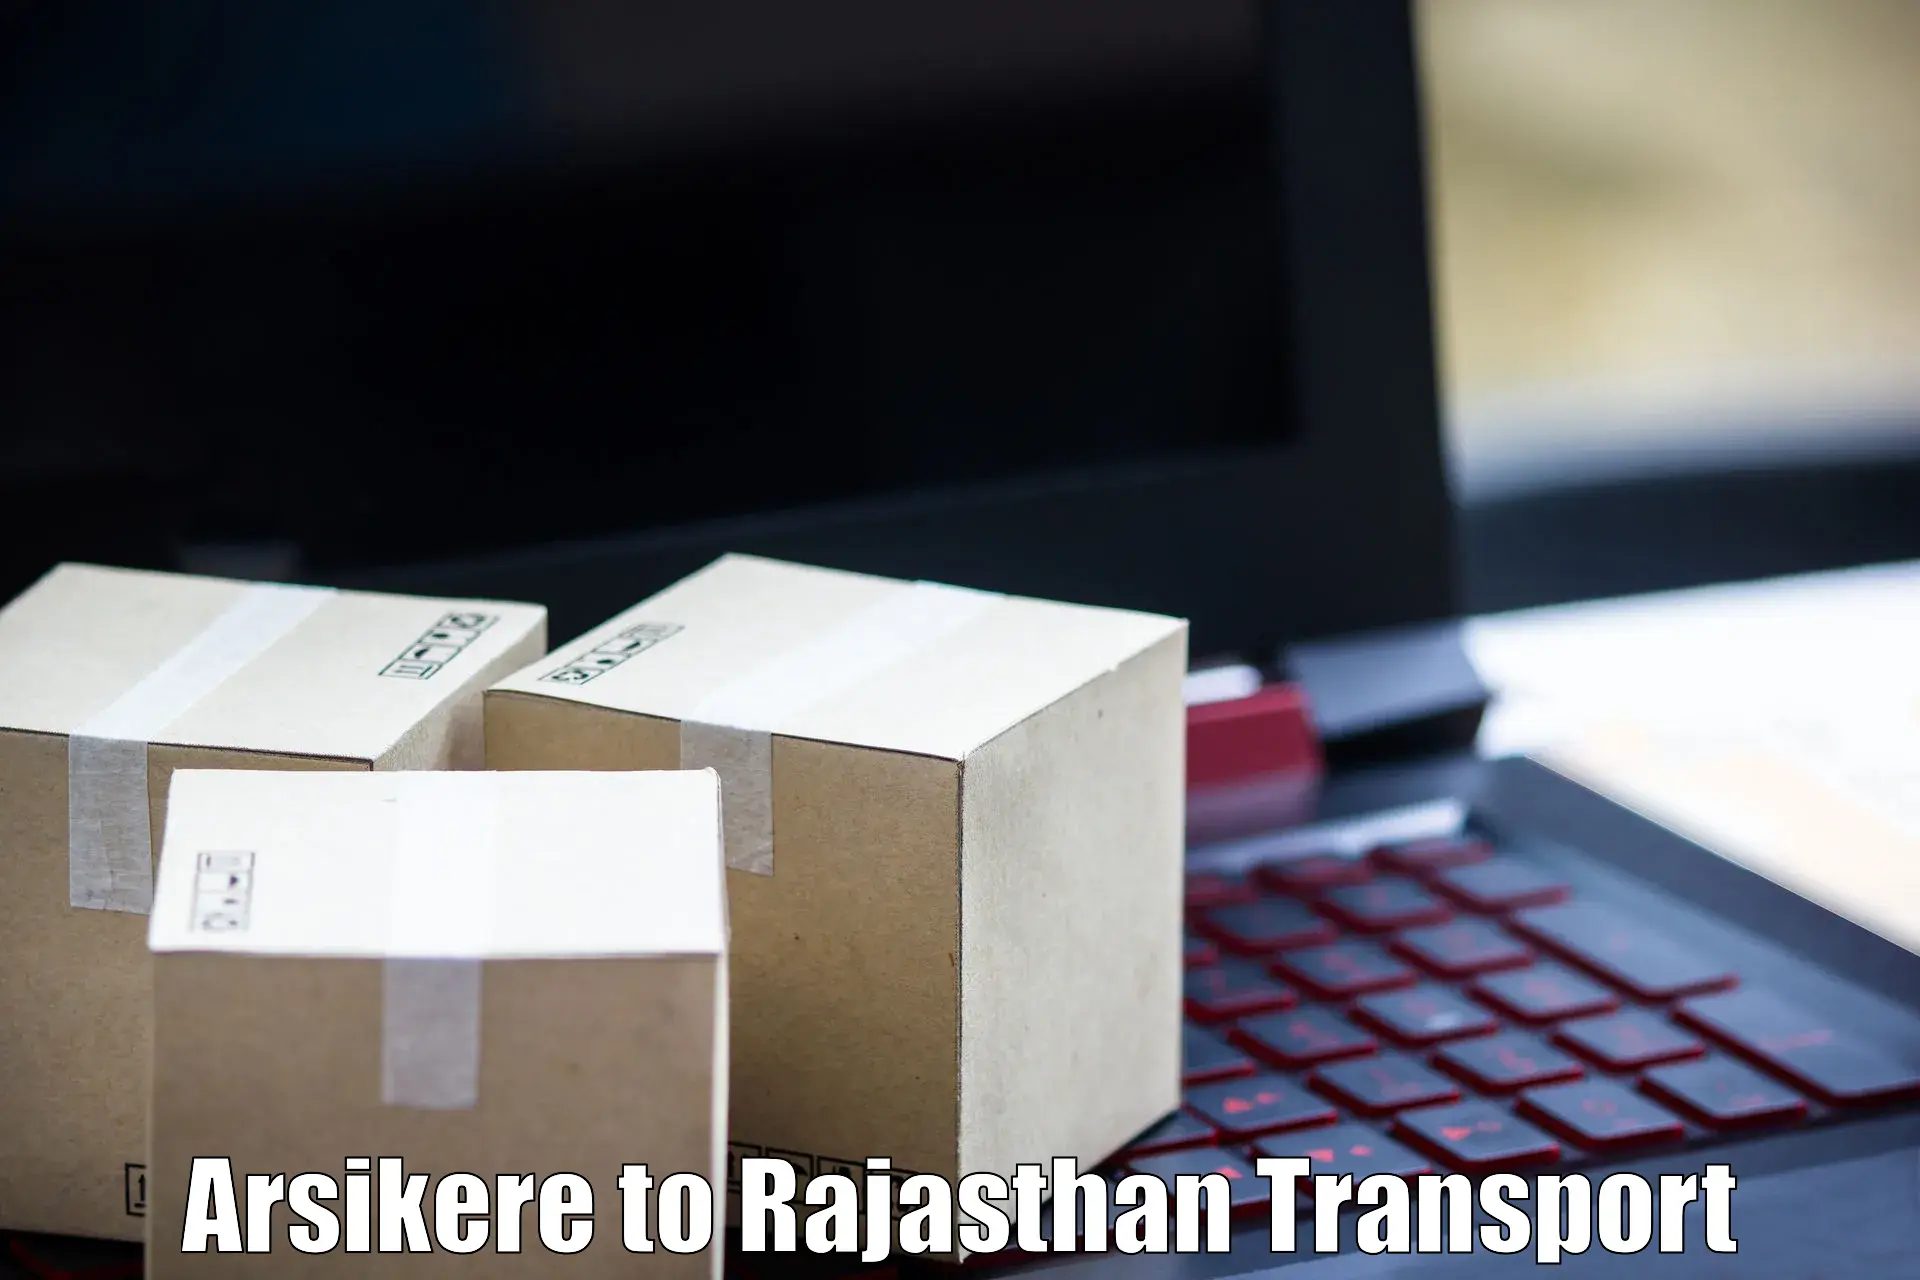 Commercial transport service Arsikere to Rajasthan